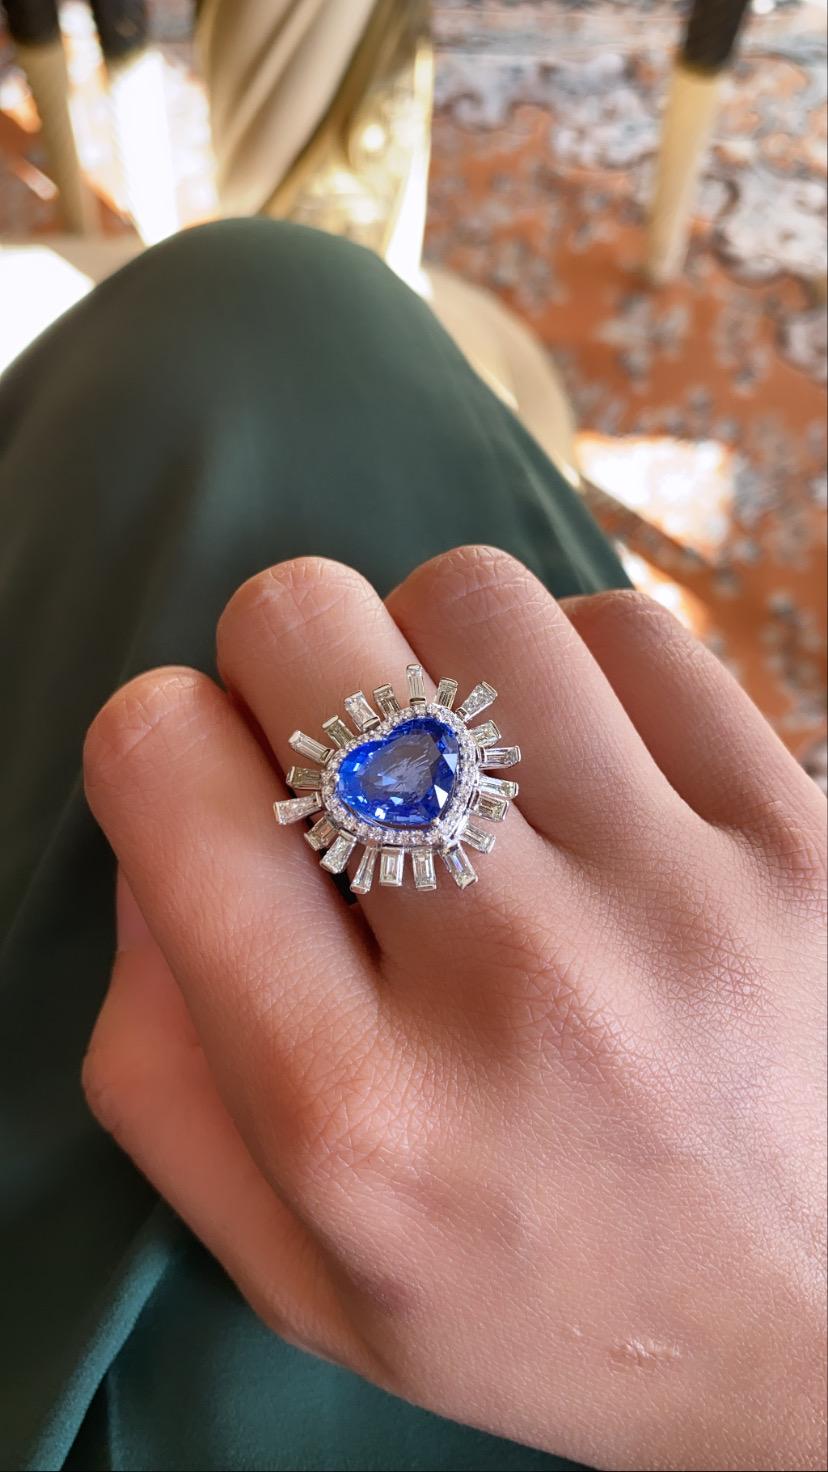 A beautiful and gorgeous heart shape blue sapphire set in 18k white gold with diamonds. The blue sapphire originates from ceylon and weight is 6.06 carats , the natural diamond weight is 1.79 carats. The net gold weight is 7.34 grams and ring